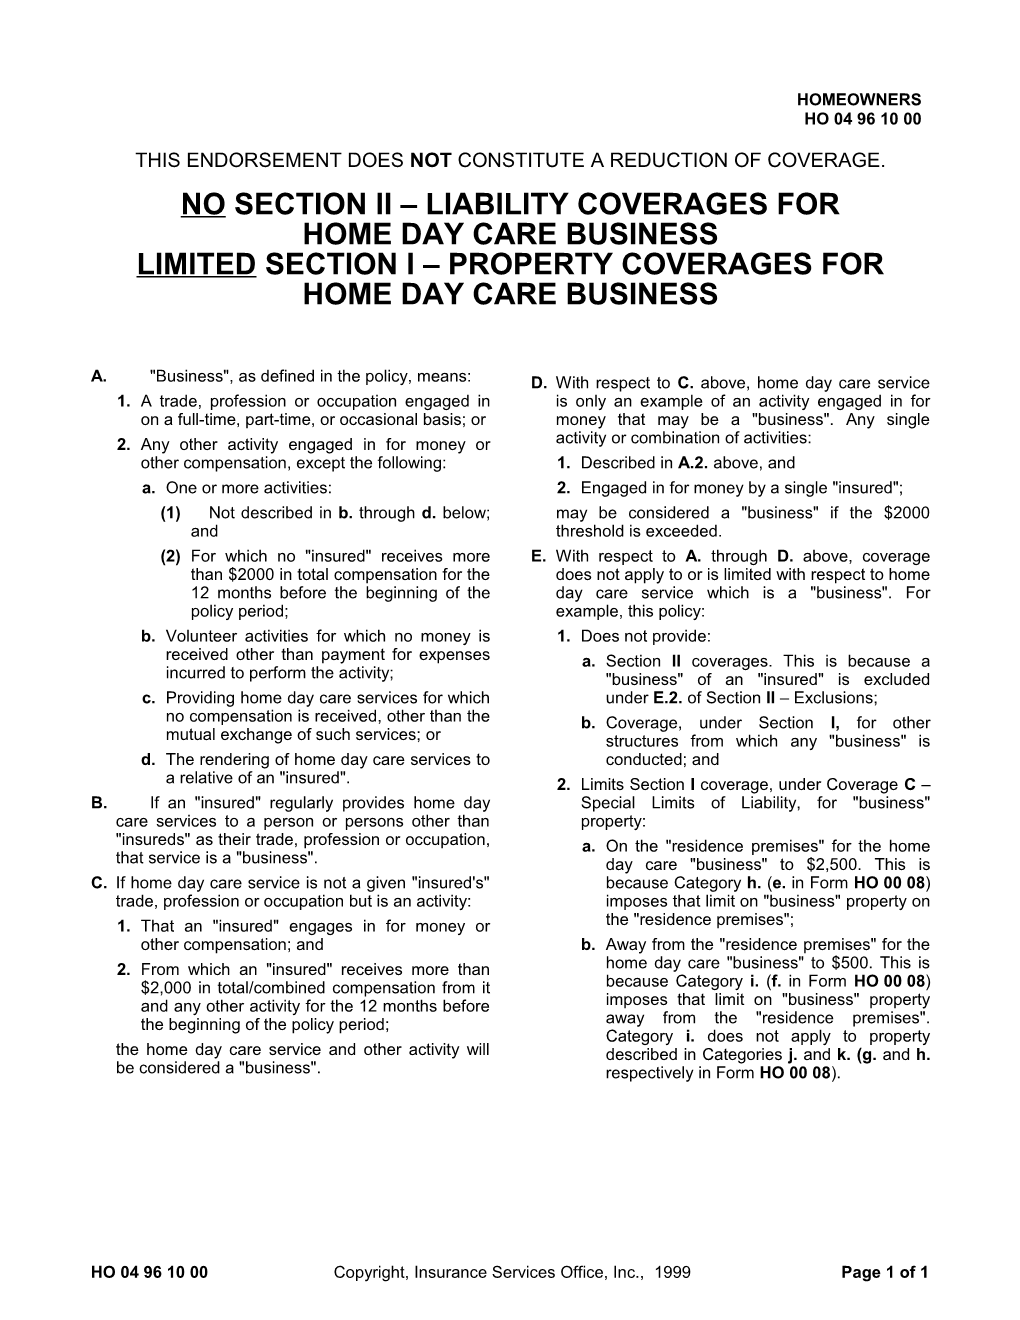 No Section Ii - Liability Coverages for Home Day Care Business Limited Section I - Property